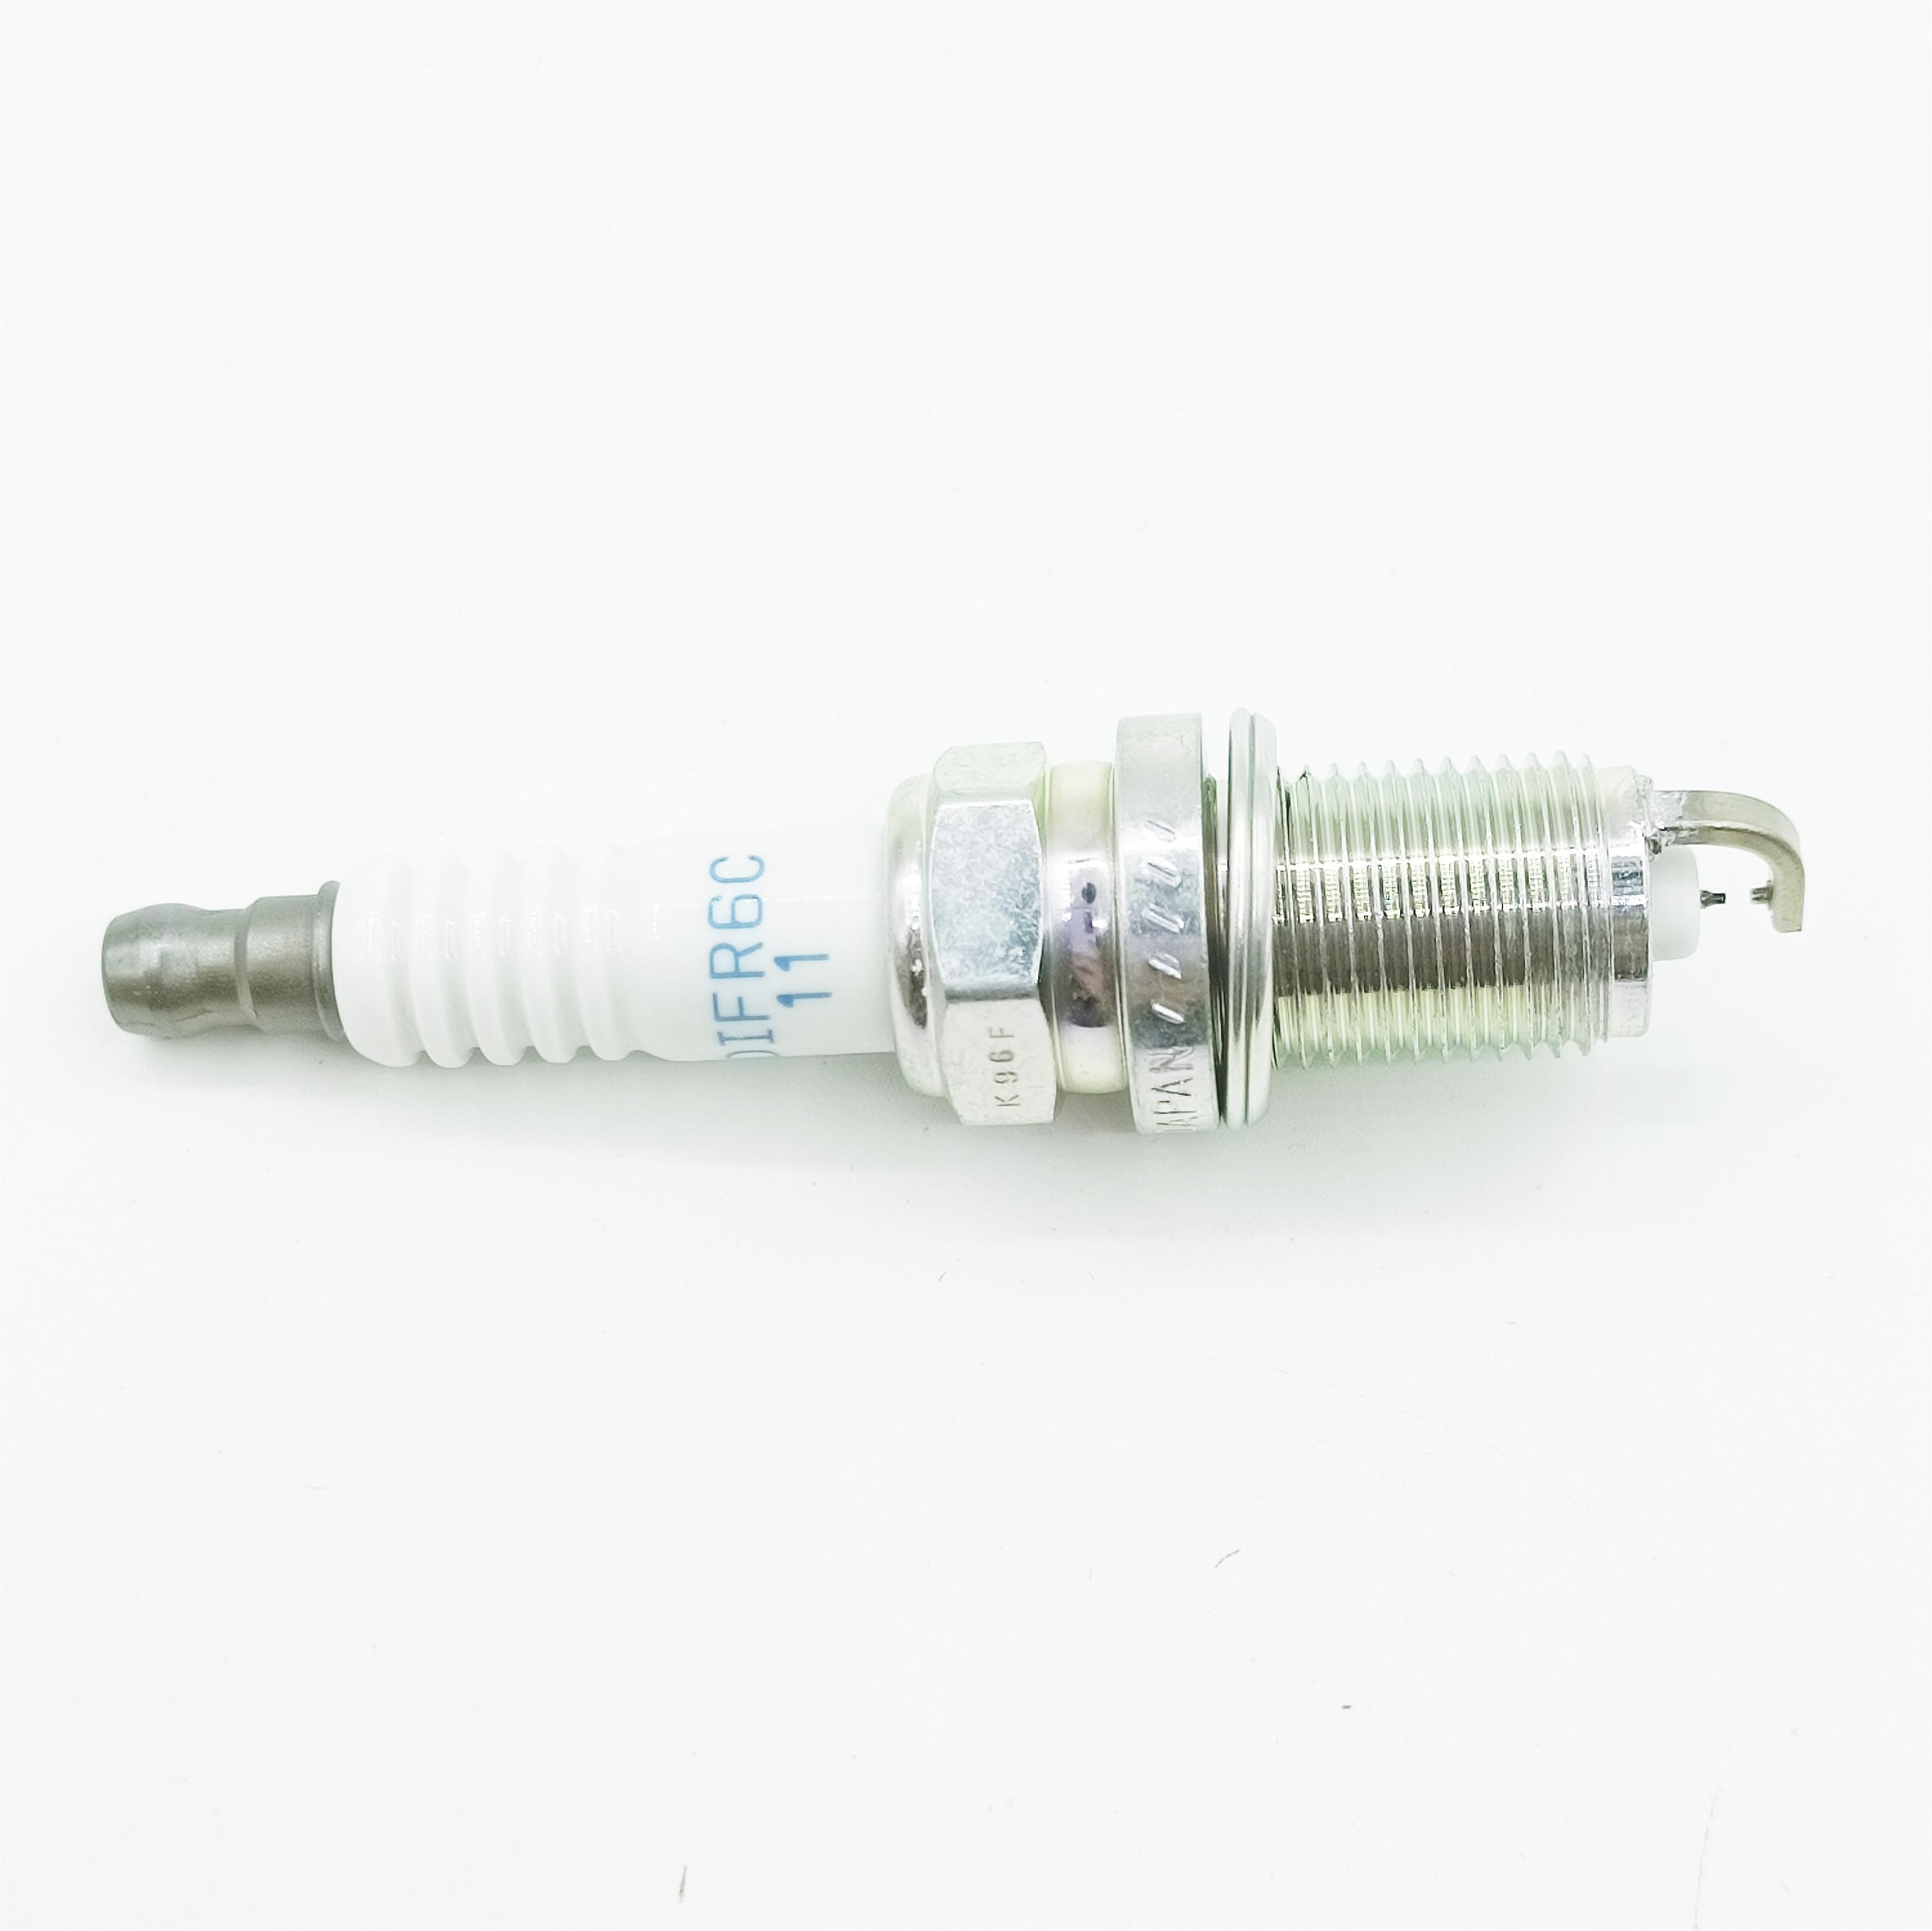 MS851358 MS851367 MS851368 MS851727 1822A002  1822A011 1822A022  1822A069 DIFR6C11 for Mitsubishi Pajero Speedster  Spark Plug